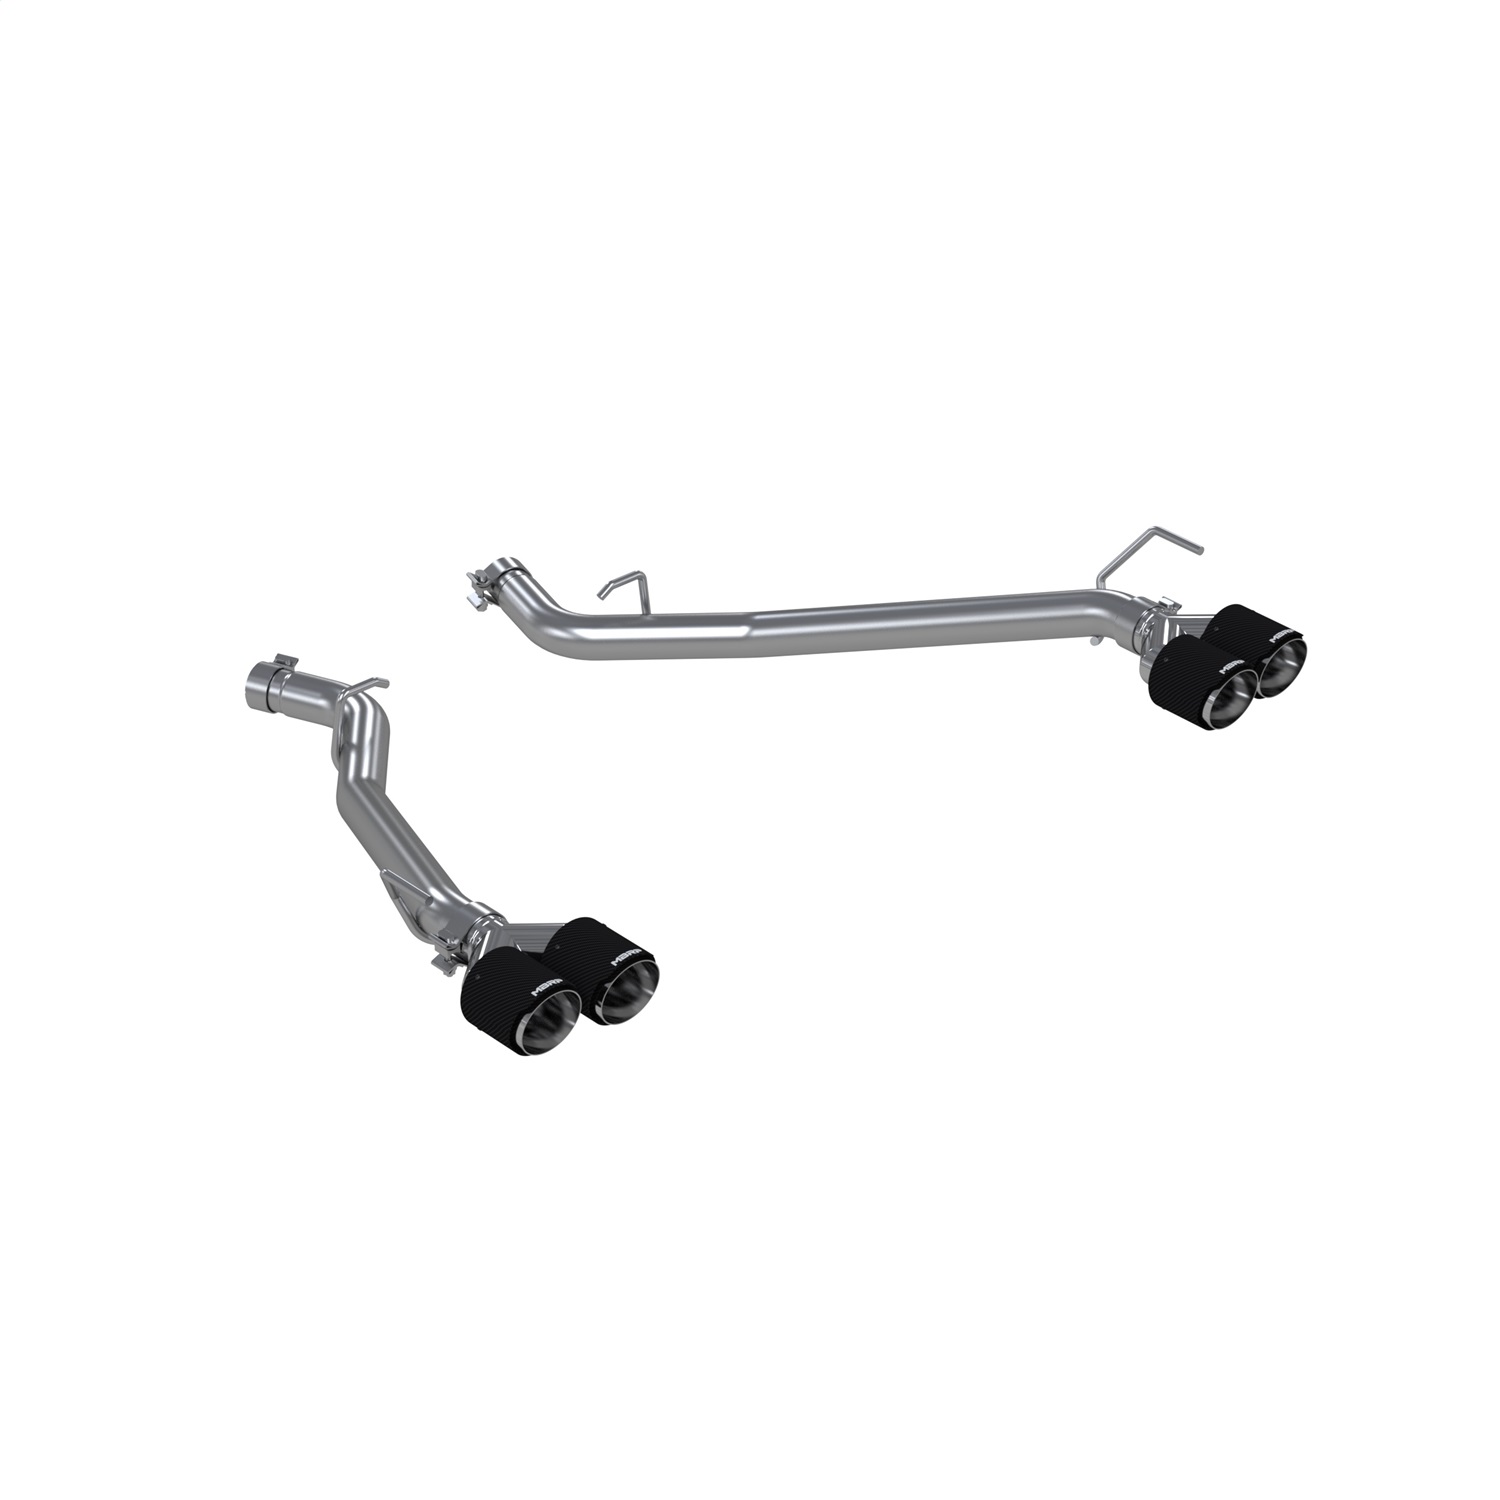 MBRP Exhaust S52033CF Armor Pro Axle Back Exhaust System Fits Aviator Explorer